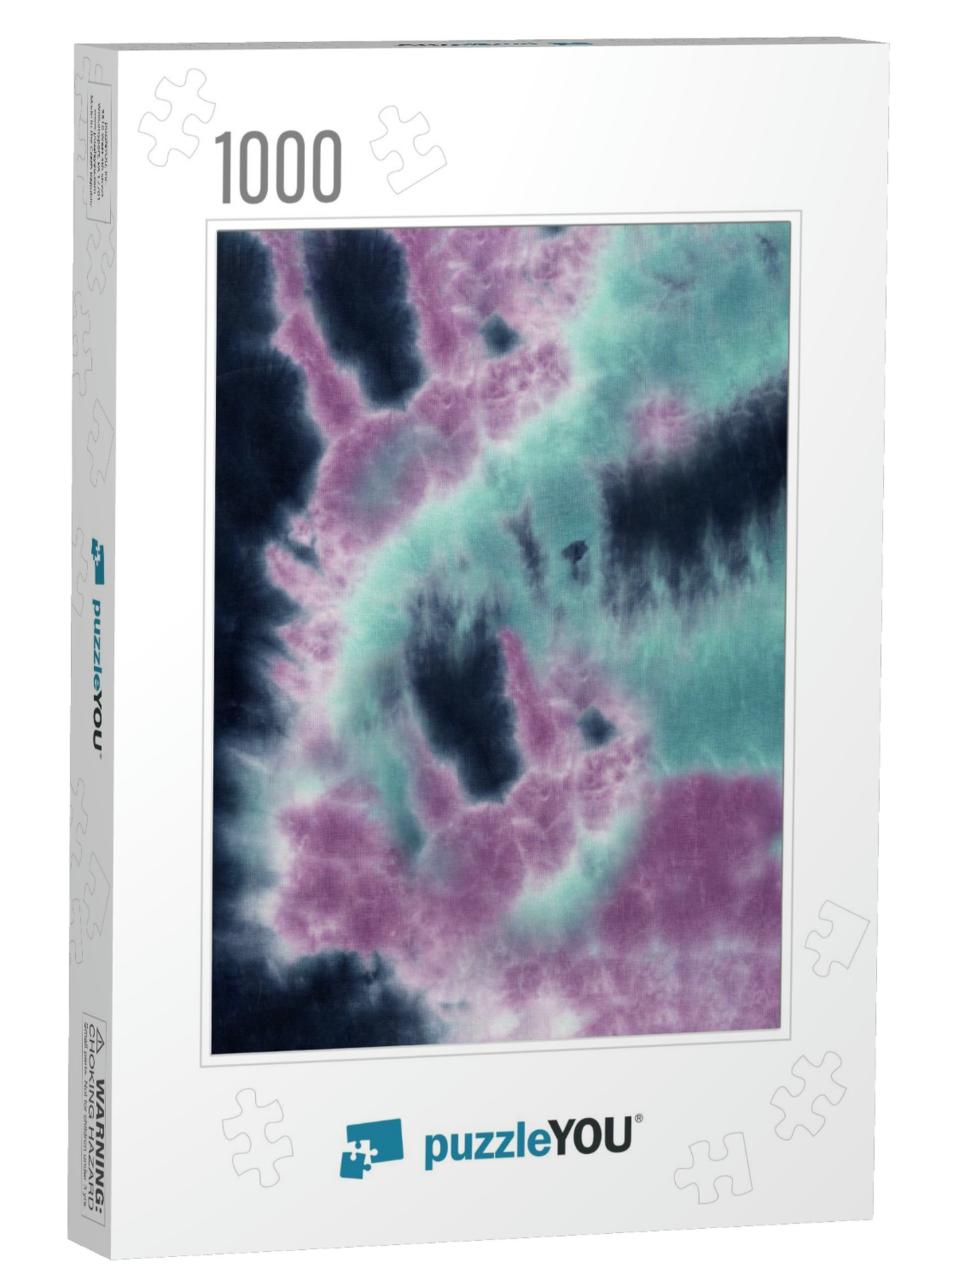 Tie Dye Navy Teal 2 Color Cloud... Jigsaw Puzzle with 1000 pieces